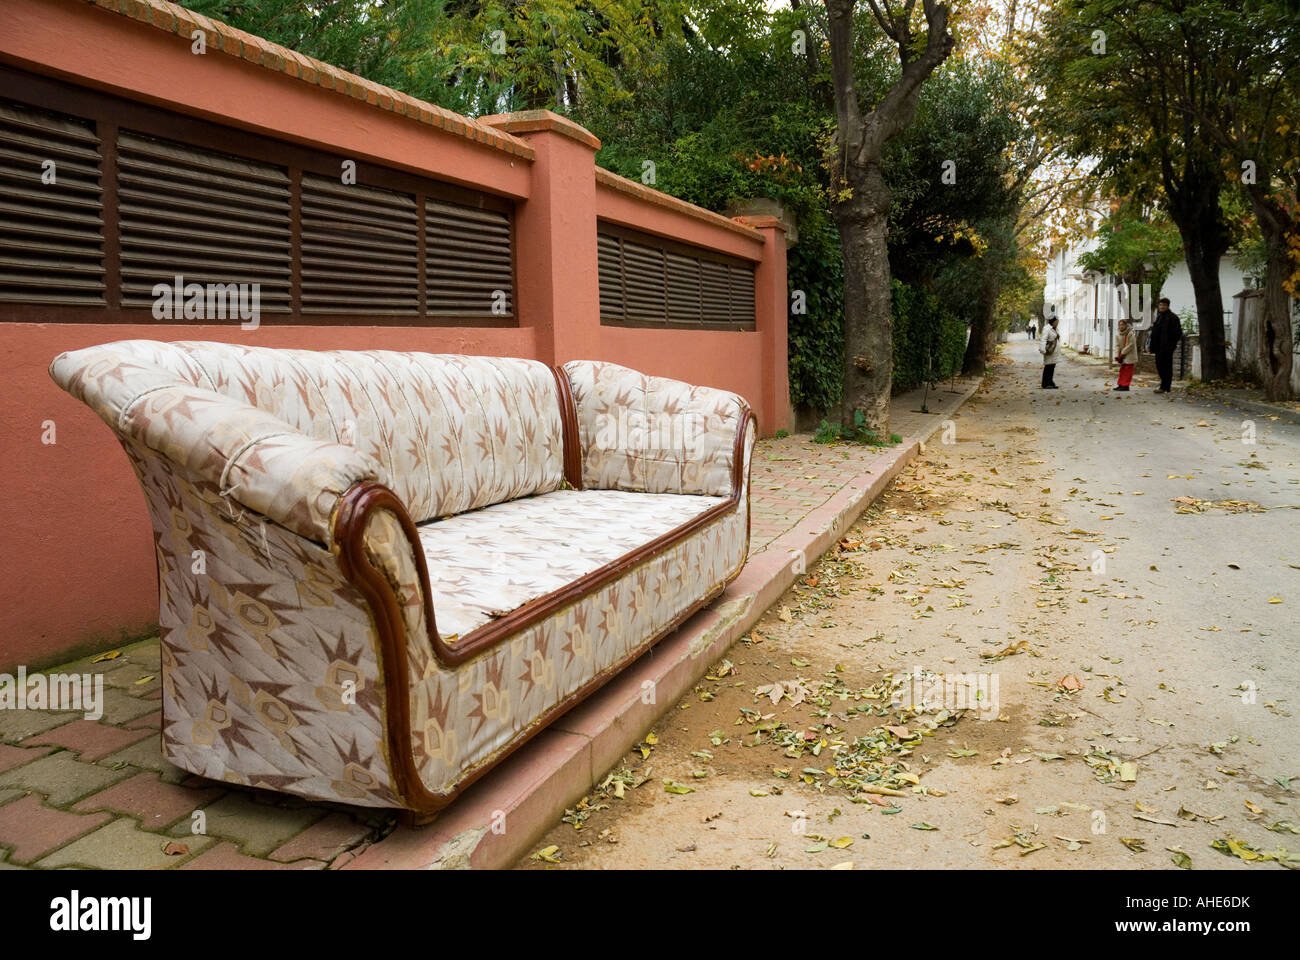 couch-by-the-road-buyukada-biggest-of-the-princes-islands-istanbul-AHE6DK.jpg